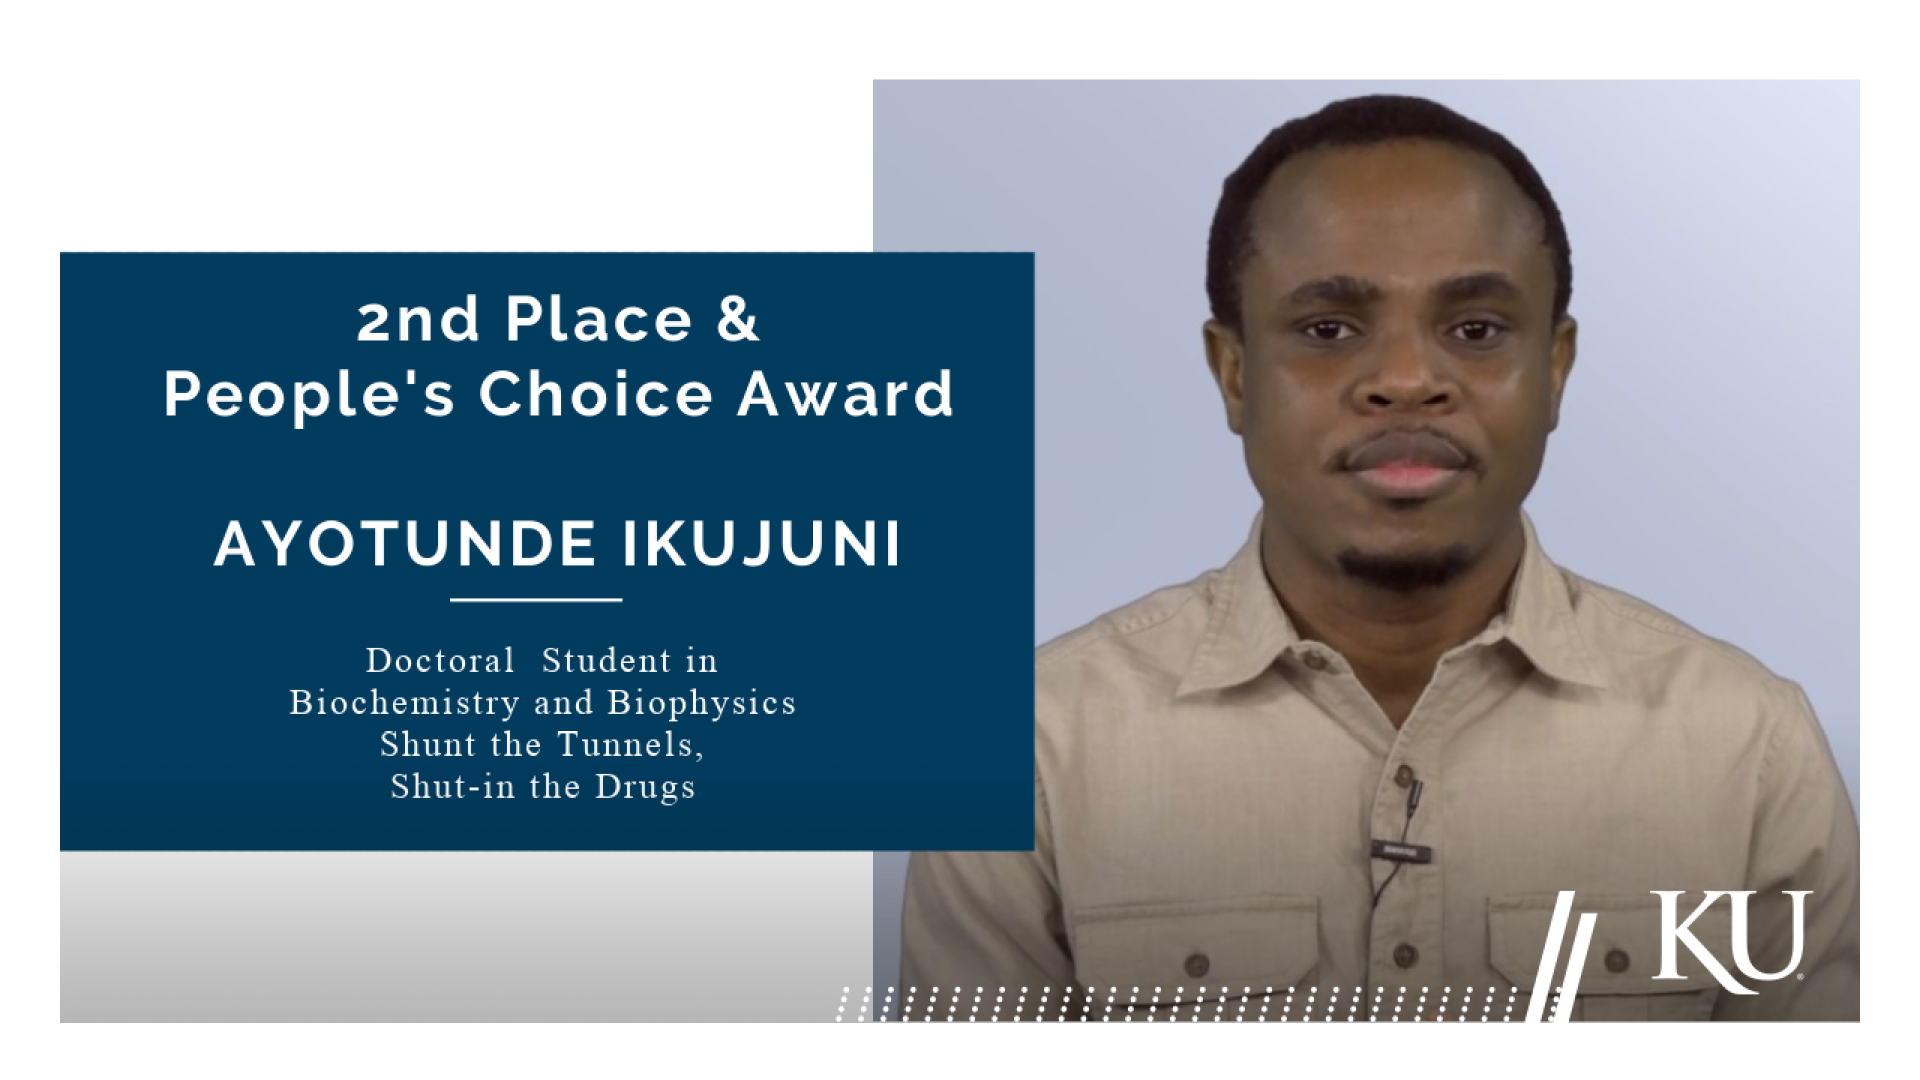 Image of Ayotunde Ikujuni with a text box that indicates he is the 2nd place and People's Choice Award winner